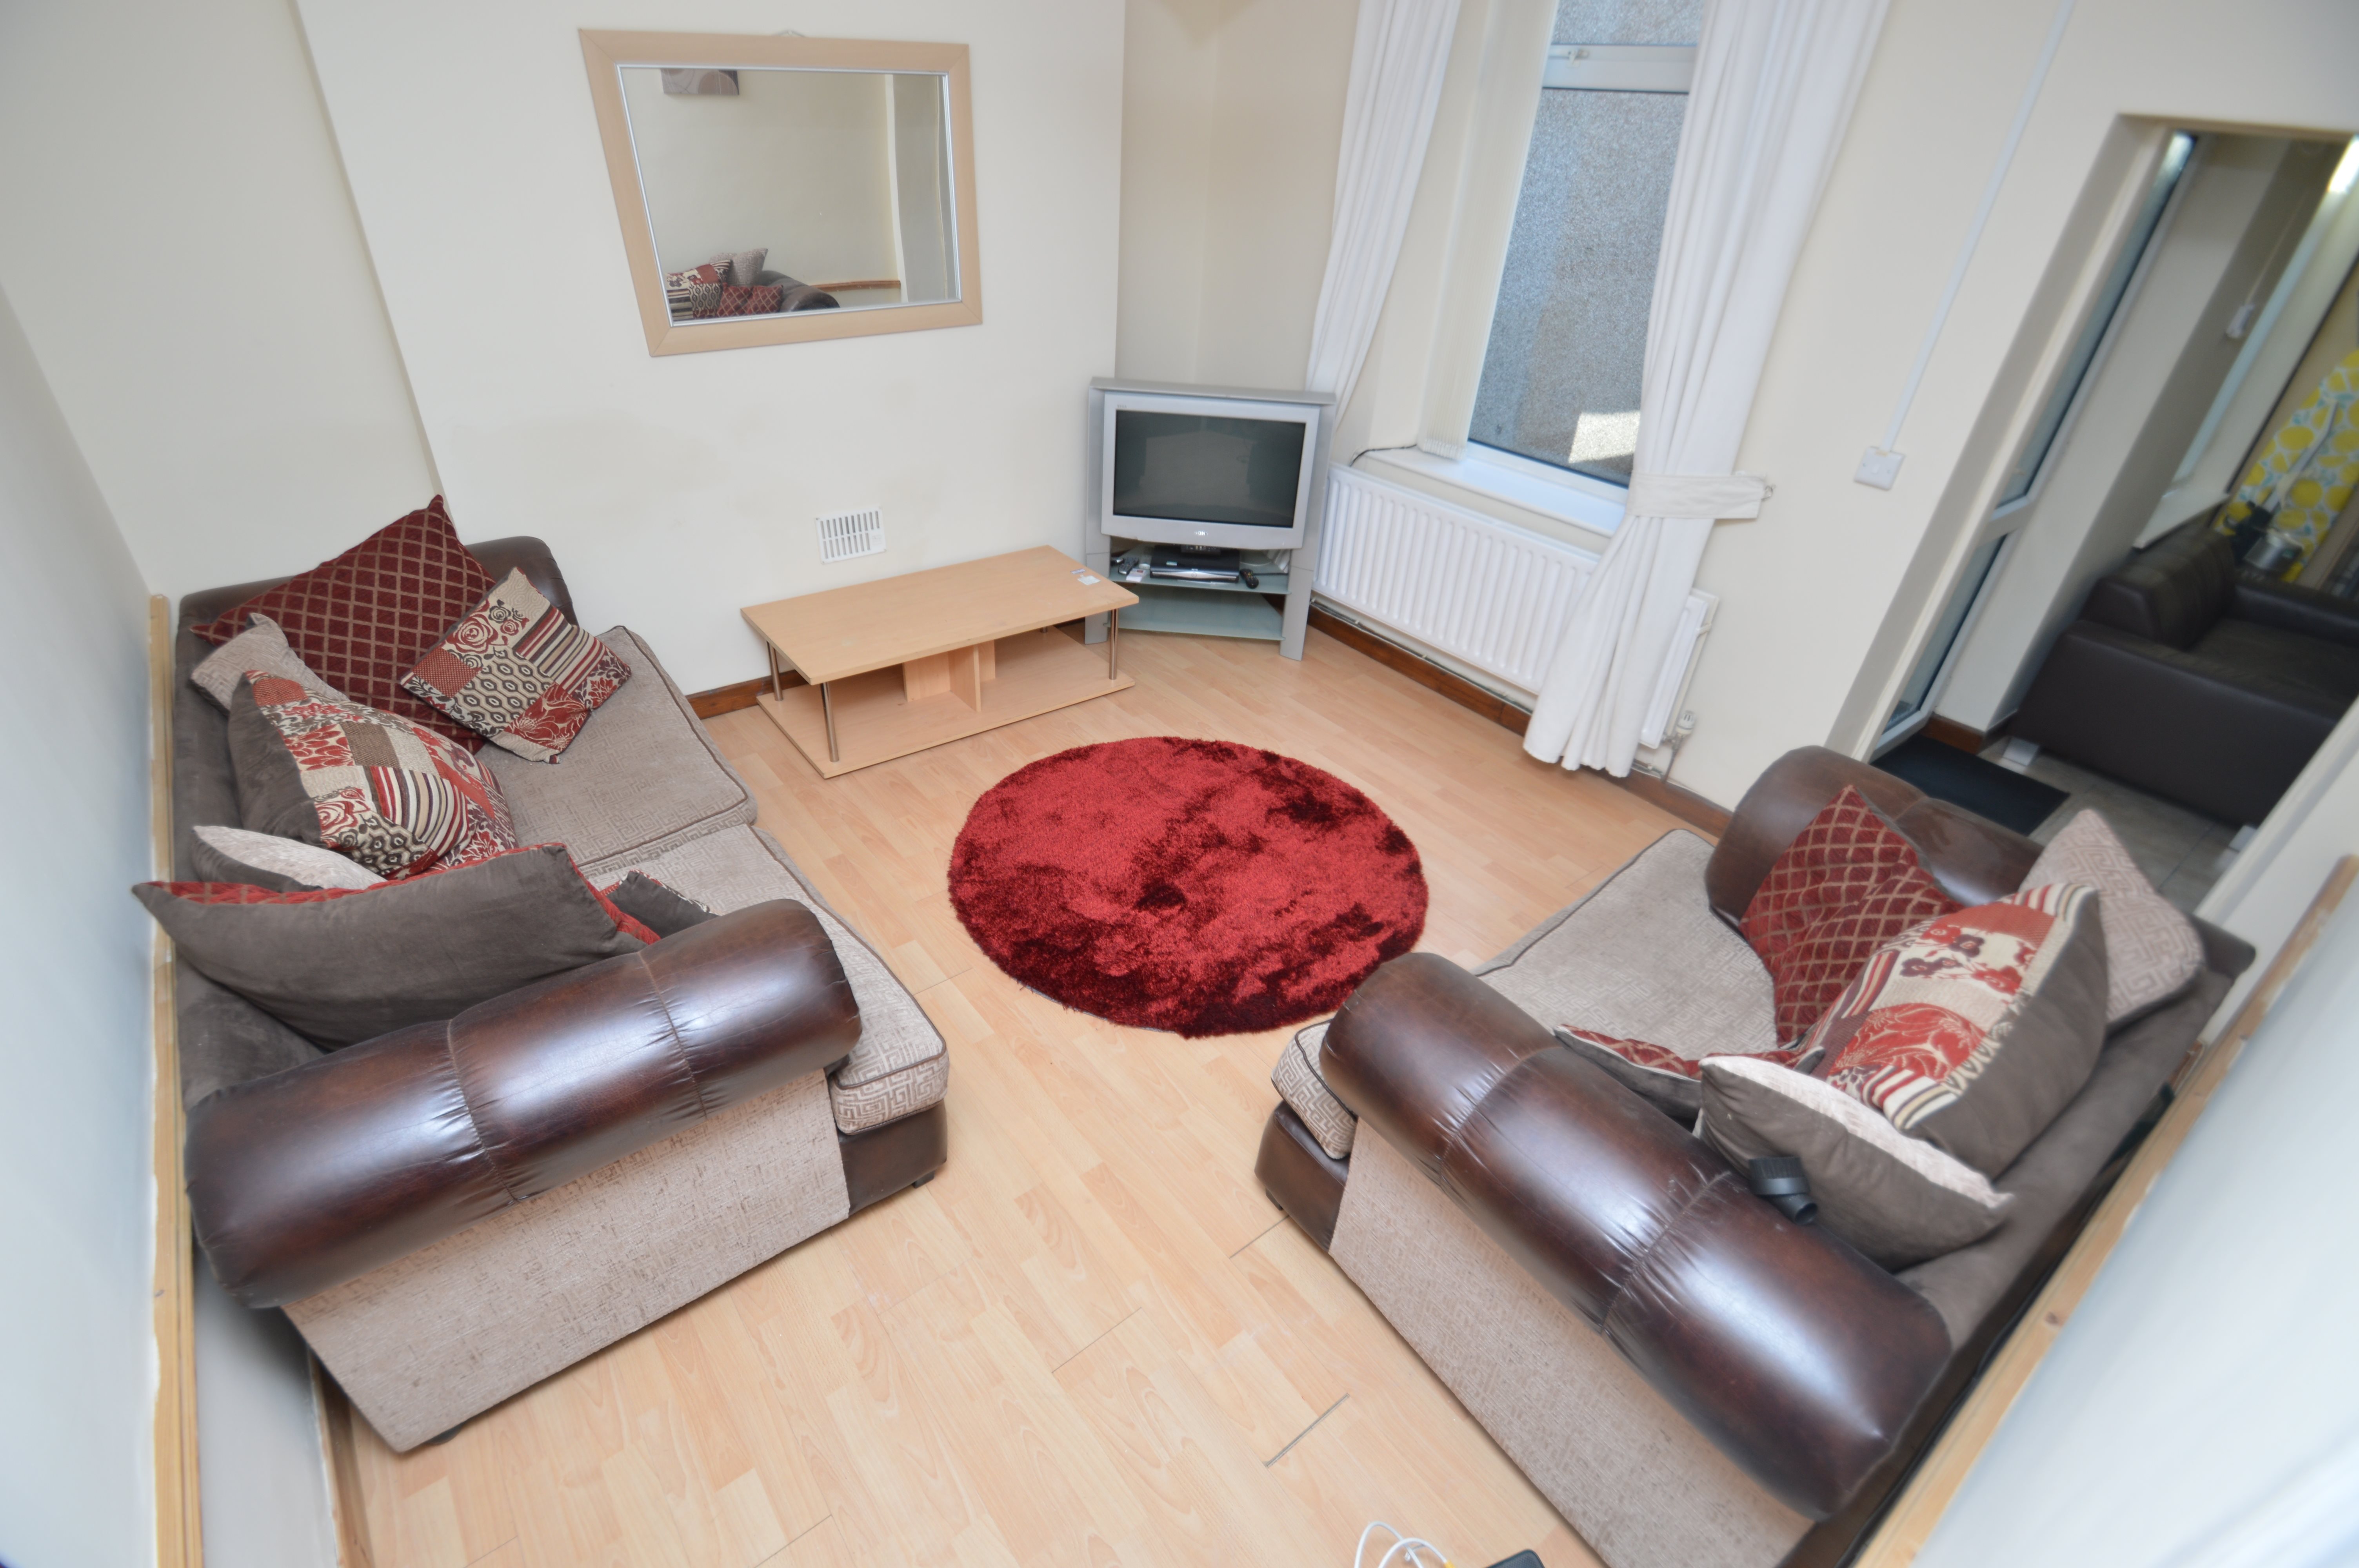 1 bed house / flat share to rent in Wood Road, Treforest 2